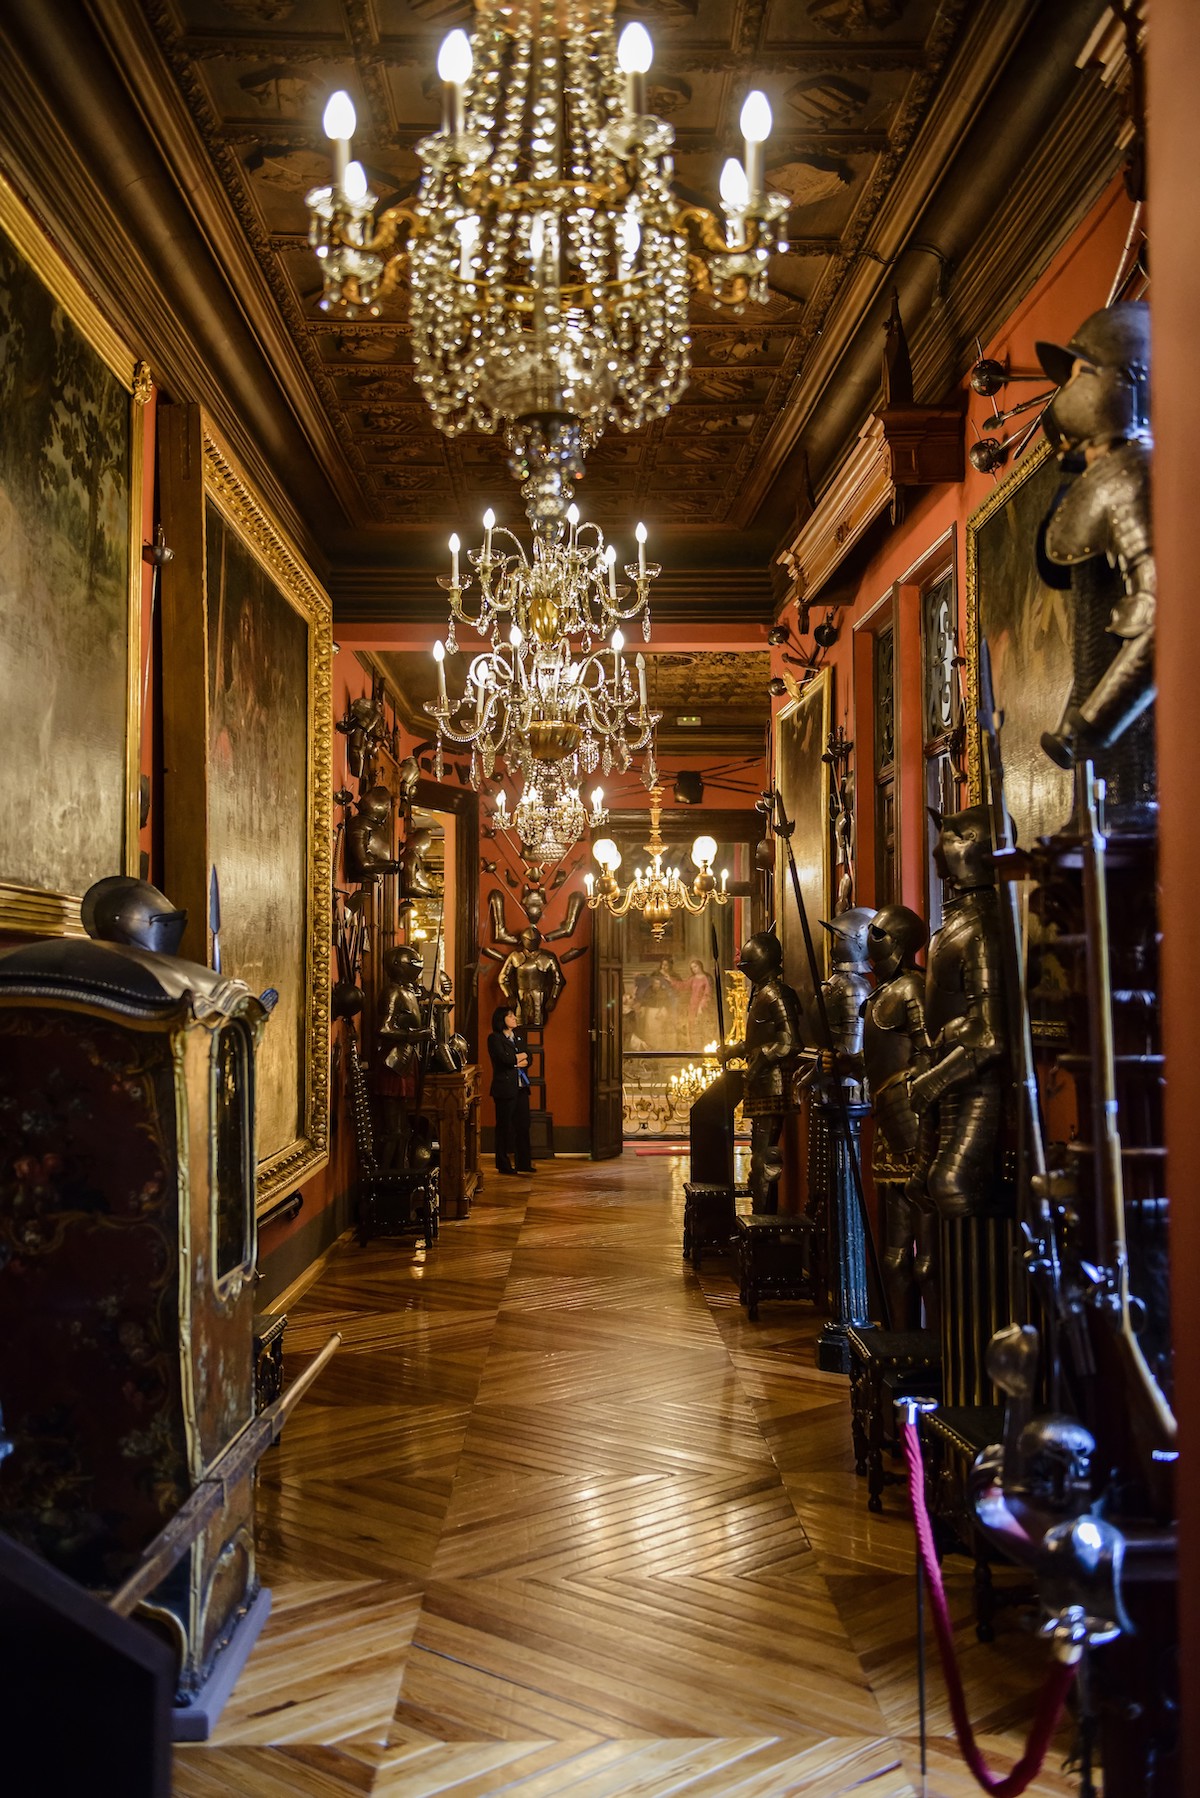 Long hallway lined with suits of armor with ornate chandeliers hanging overhead